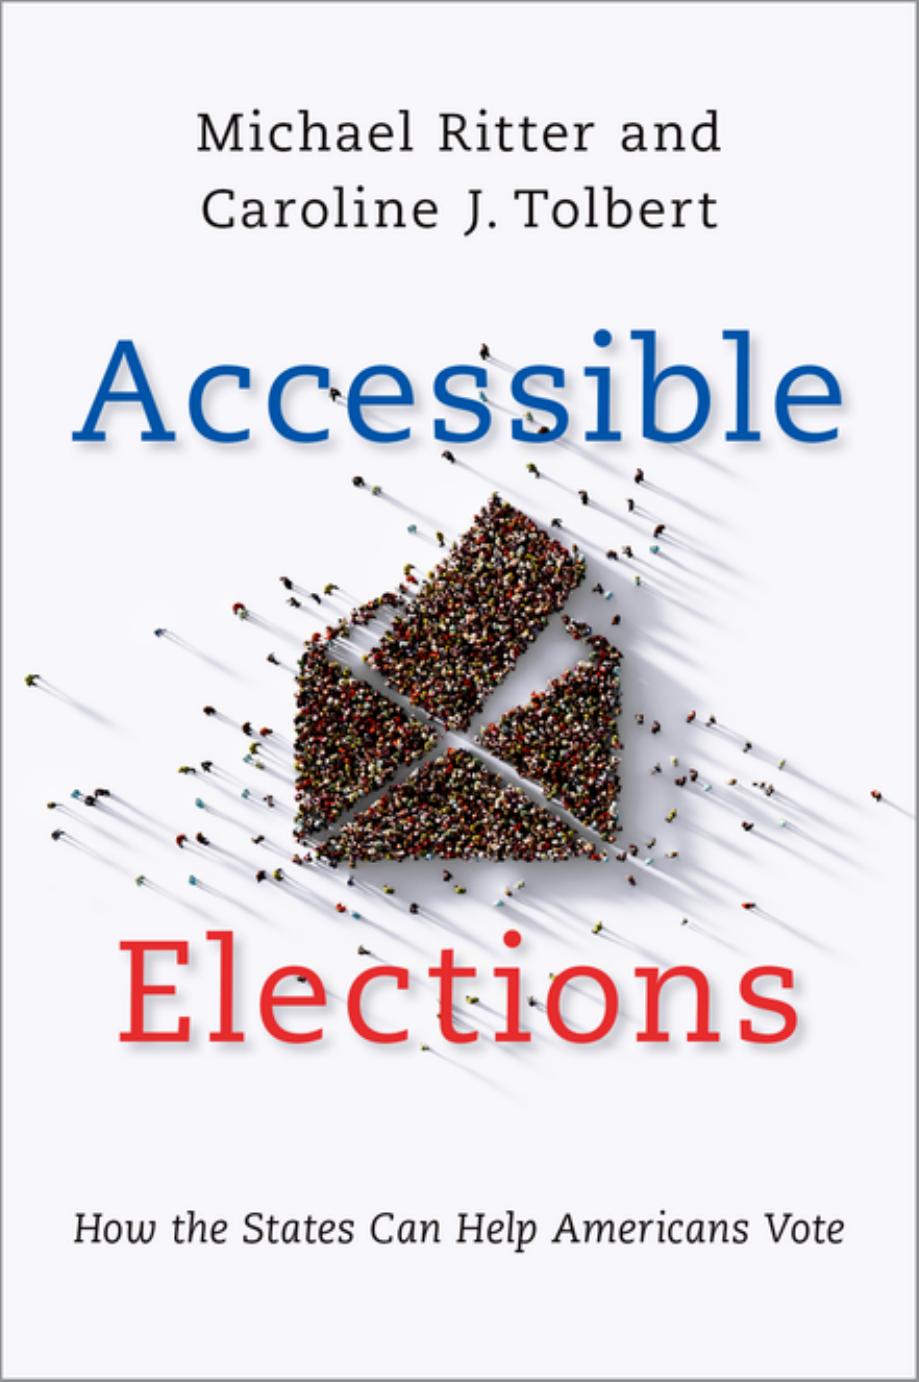 Accessible Elections by Michael Ritter;Caroline J. Tolbert;